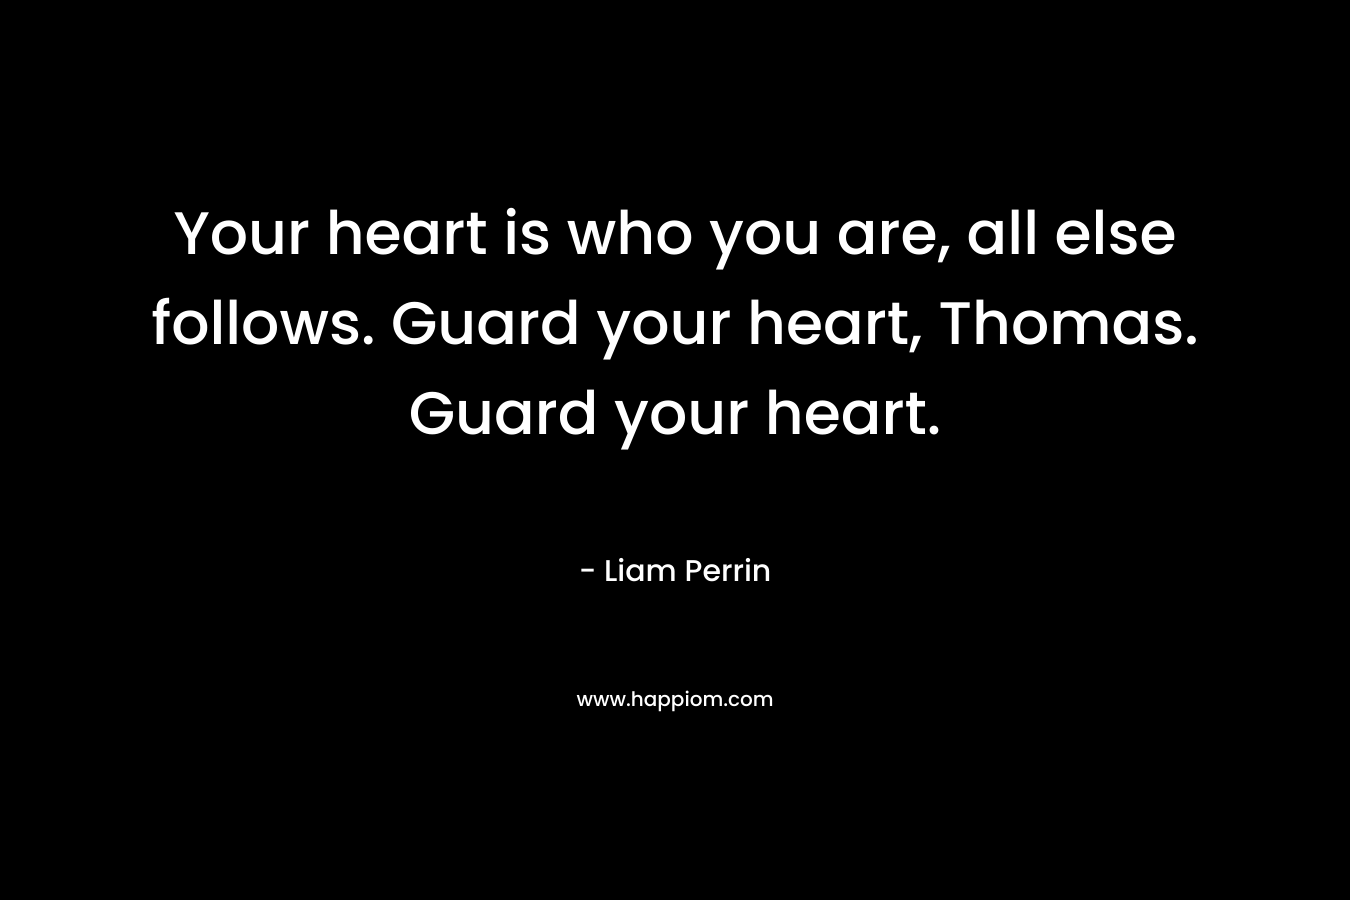 Your heart is who you are, all else follows. Guard your heart, Thomas. Guard your heart. – Liam Perrin